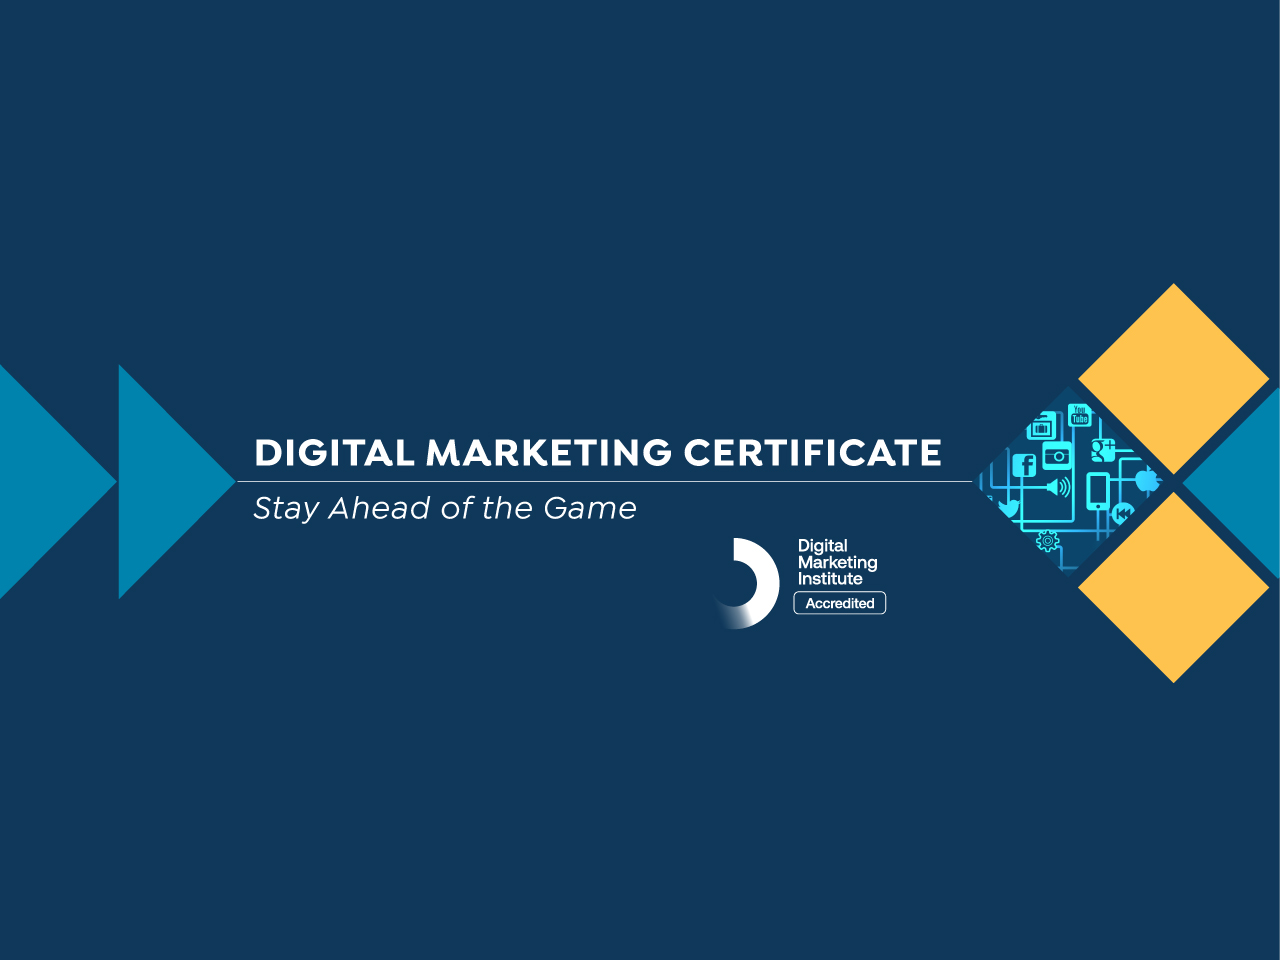 Click to visit the featured program Digital Marketing